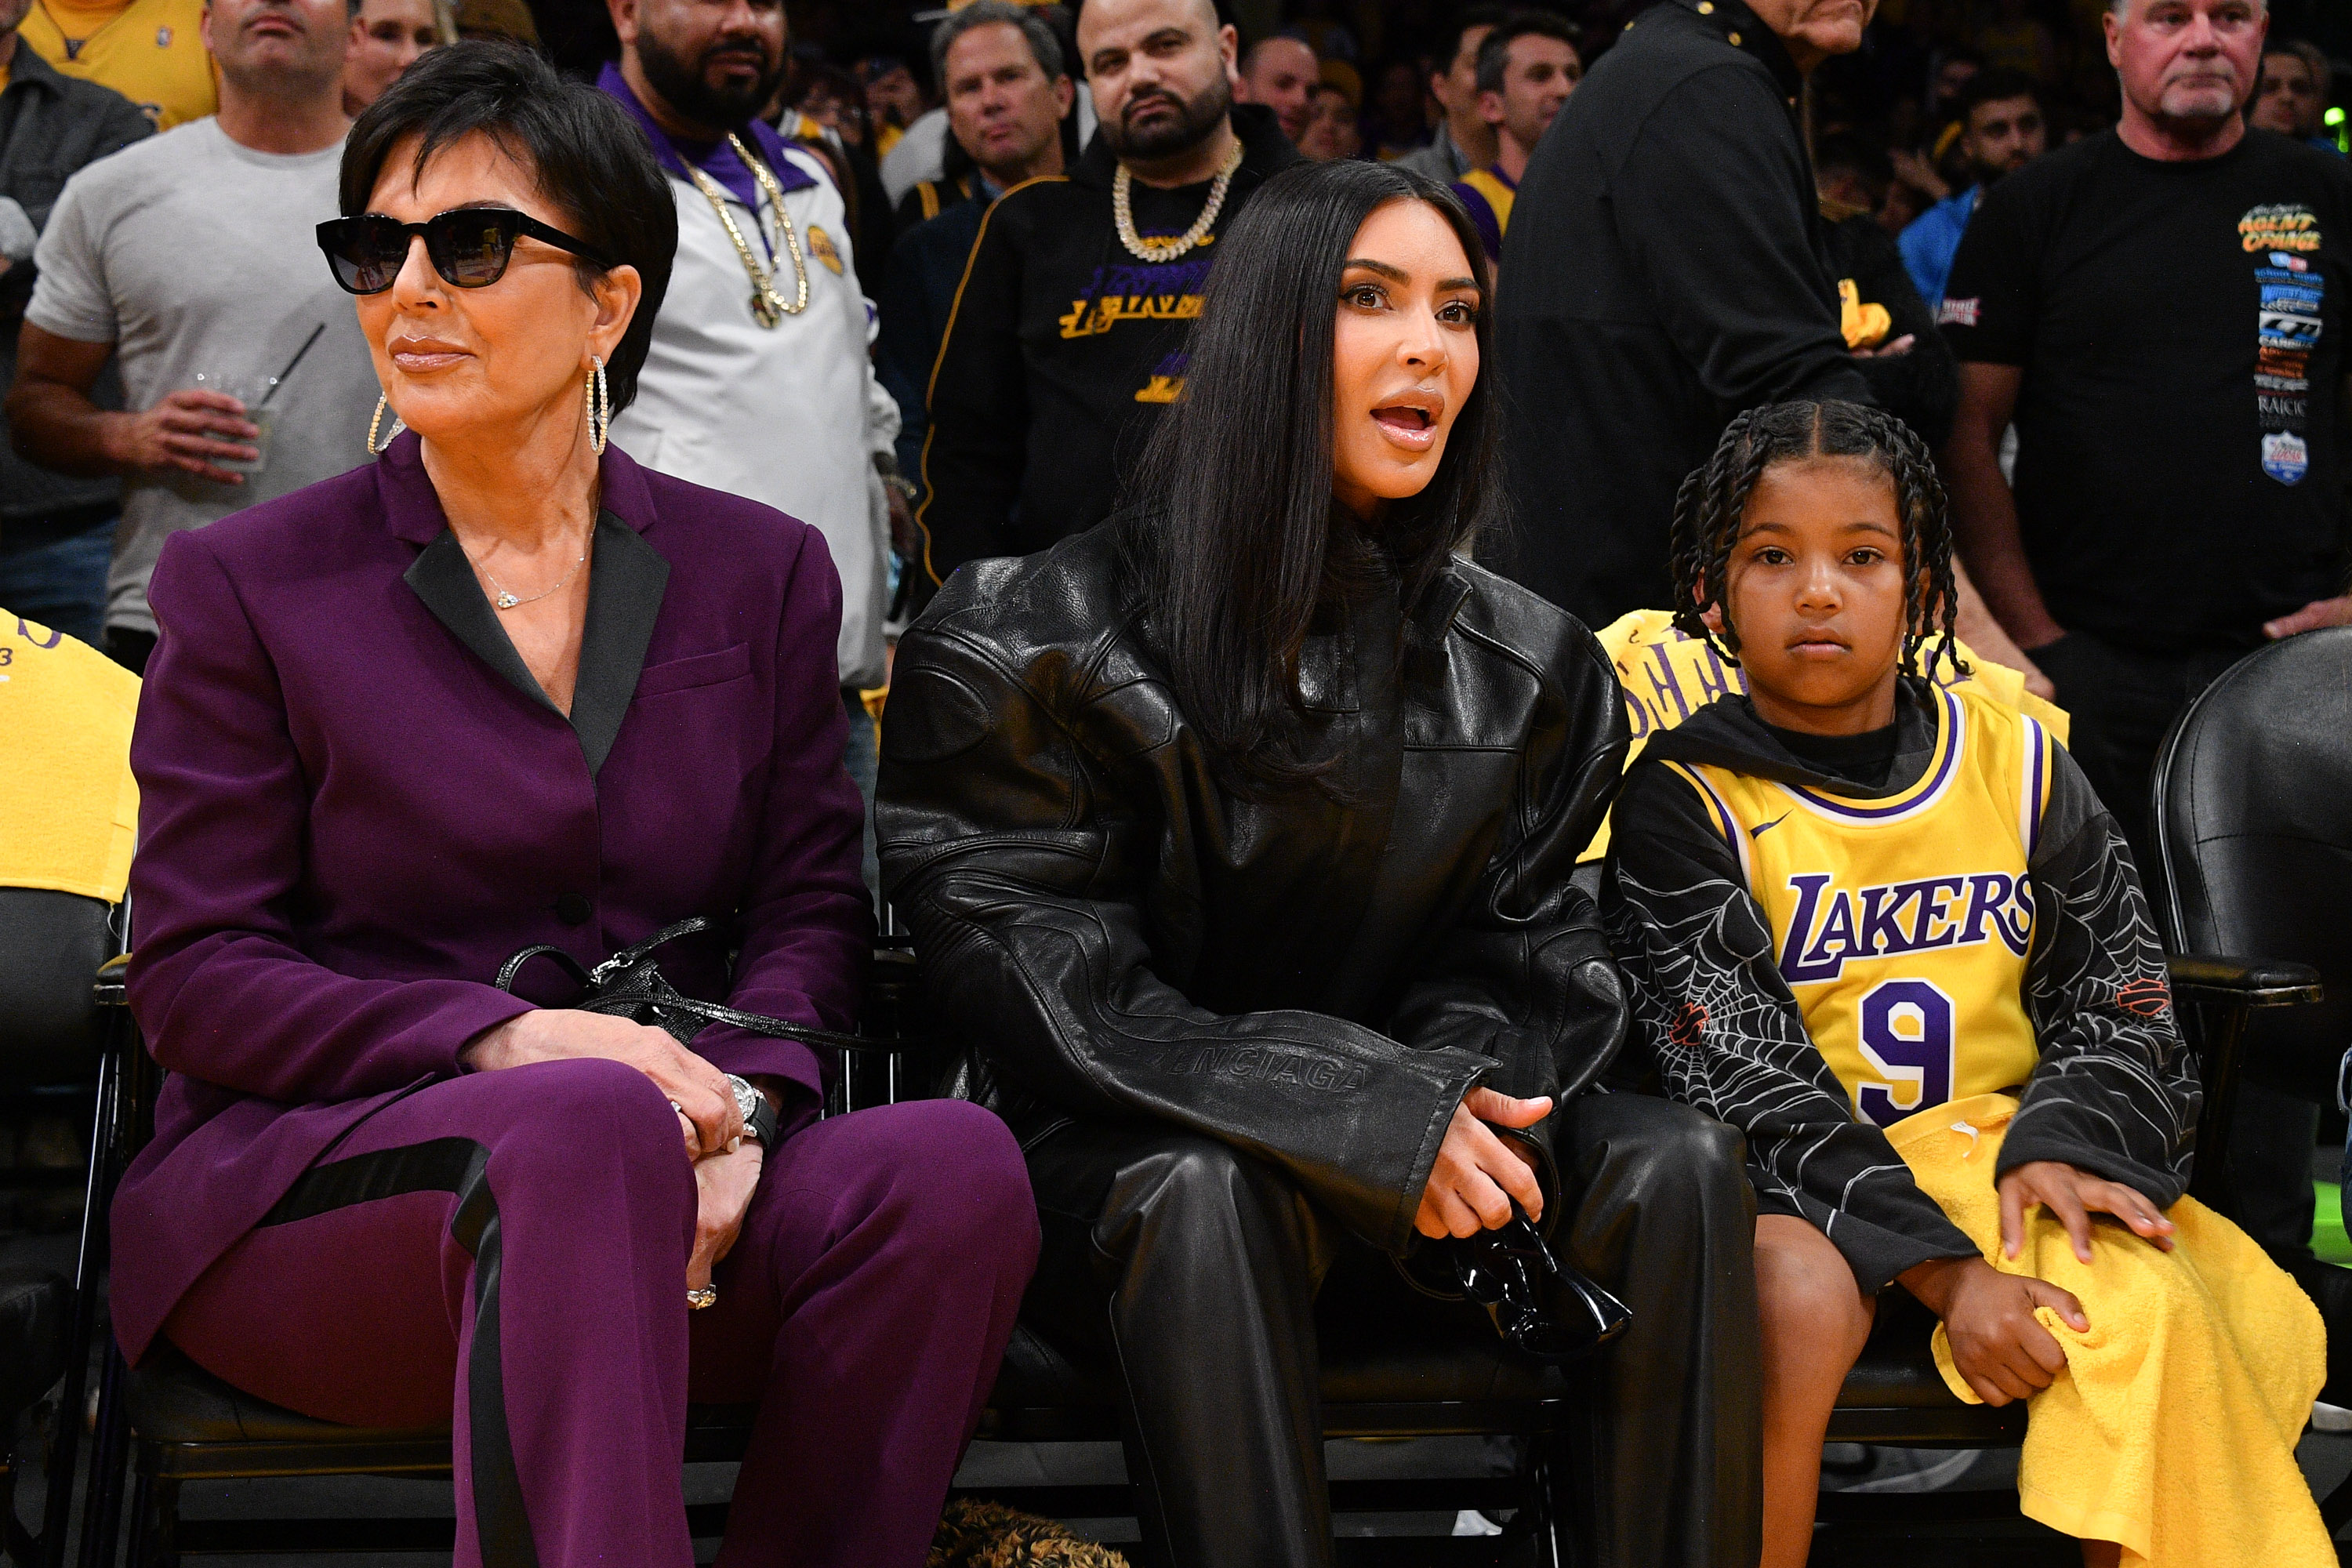 likhoa kim kardashian was spotted dressed stylishly while going to watch the basketball match between the la lakers and memphis grizzlies with her son and mother 652766a4a5909 Kim Kardashian Was Spotted Dressed Stylishly While Going To Watch The Basketball Match Between The La Lakers And Memphis Grizzlies With Her Son And Mother.